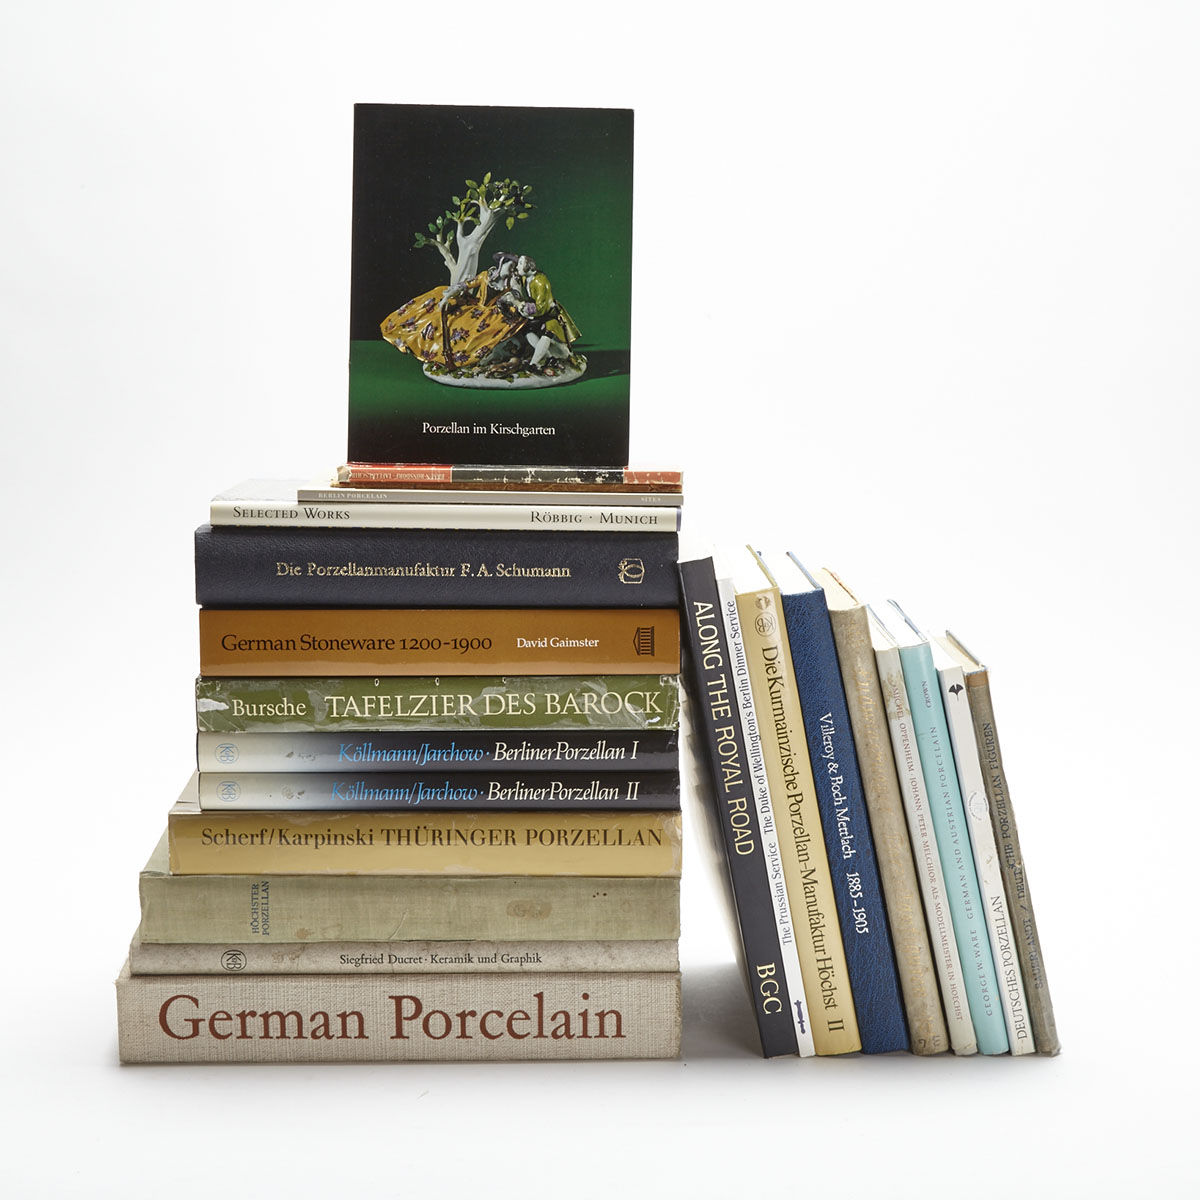 German Pottery and Porcelain (23 volumes) 